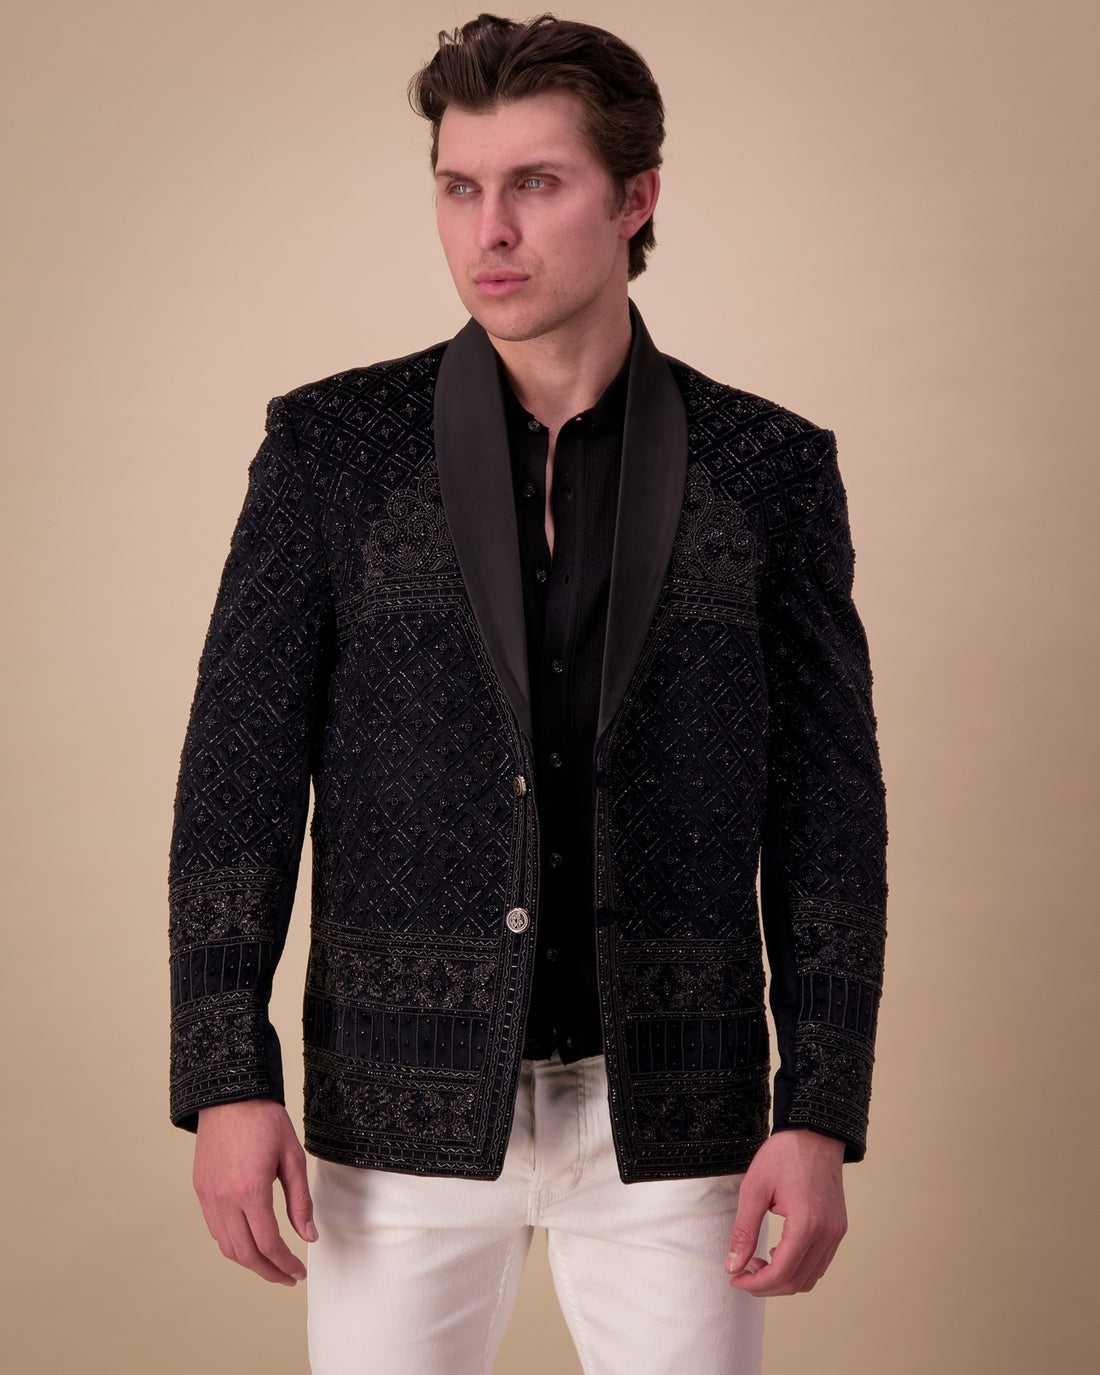 Orion - Crystal Beaded Jacket